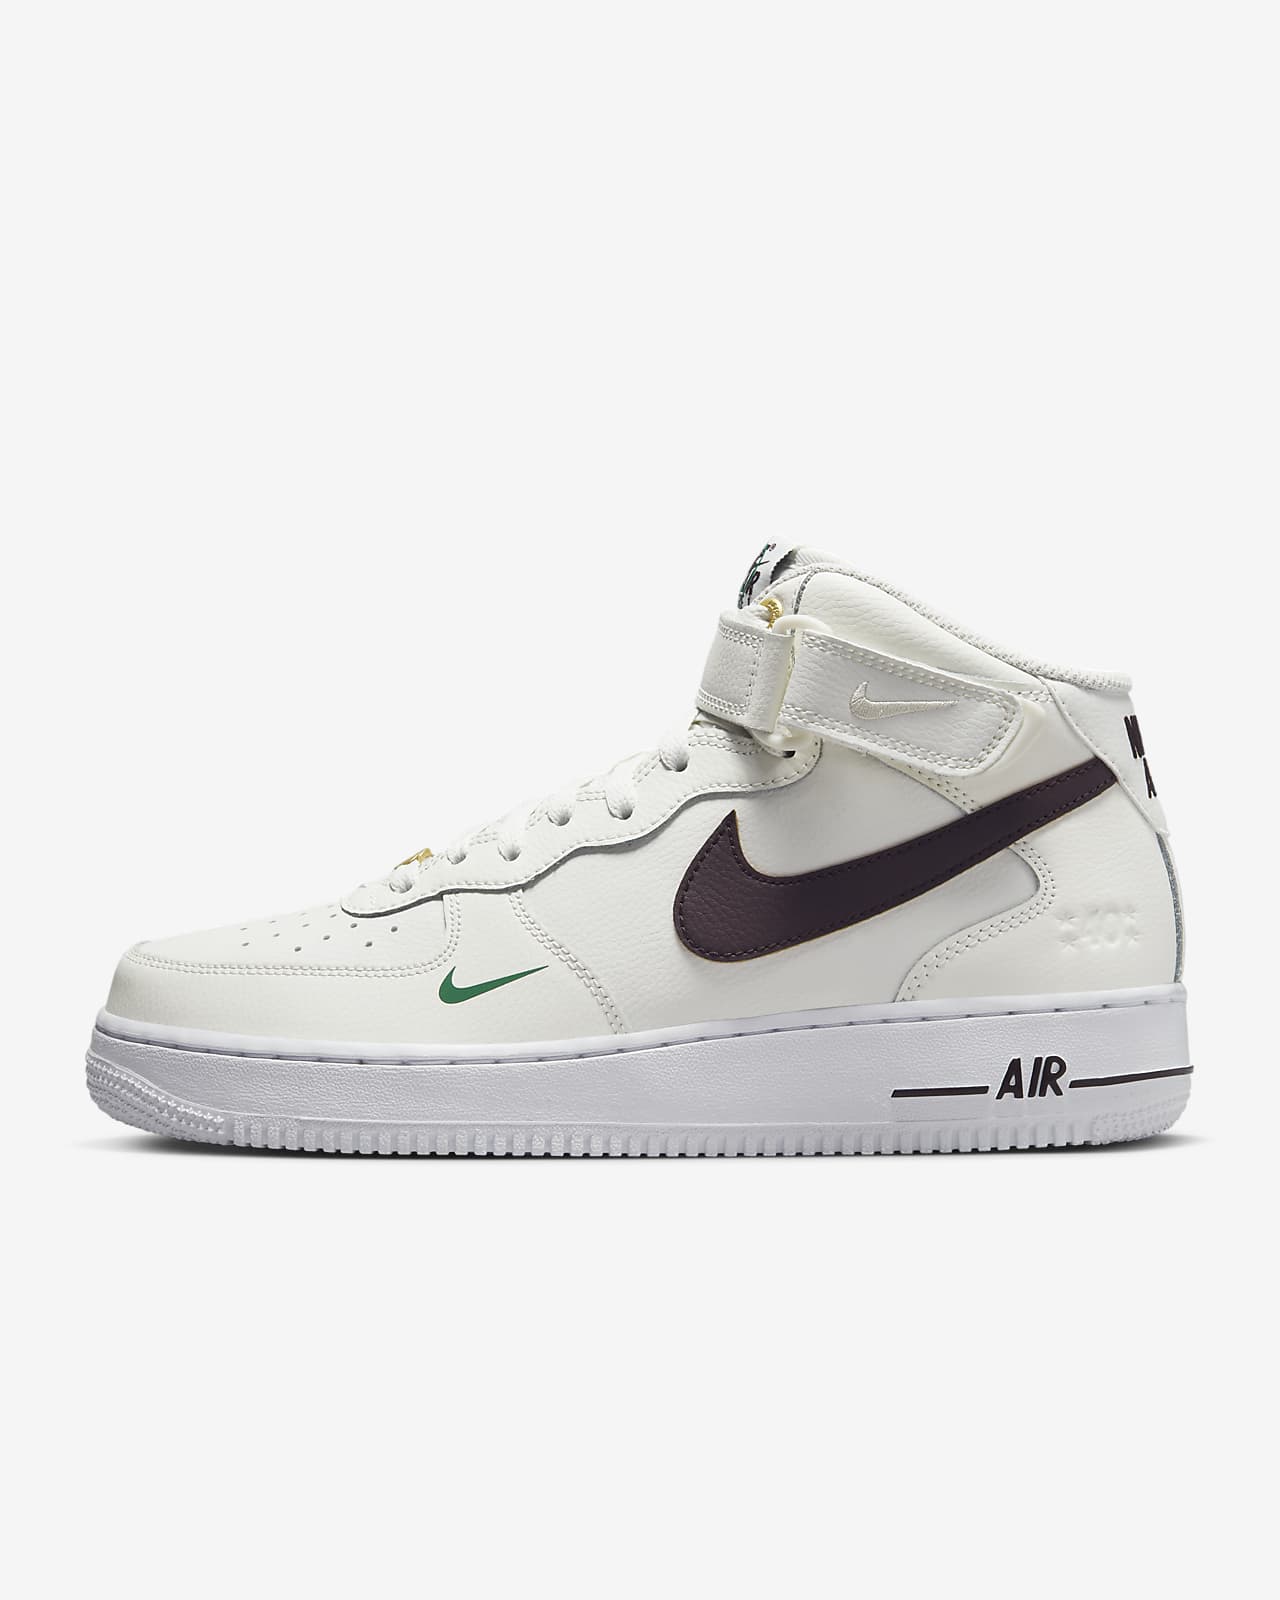 In detail To detect Indica Nike Air Force 1 Mid '07 LV8 Men's Shoes. Nike.com